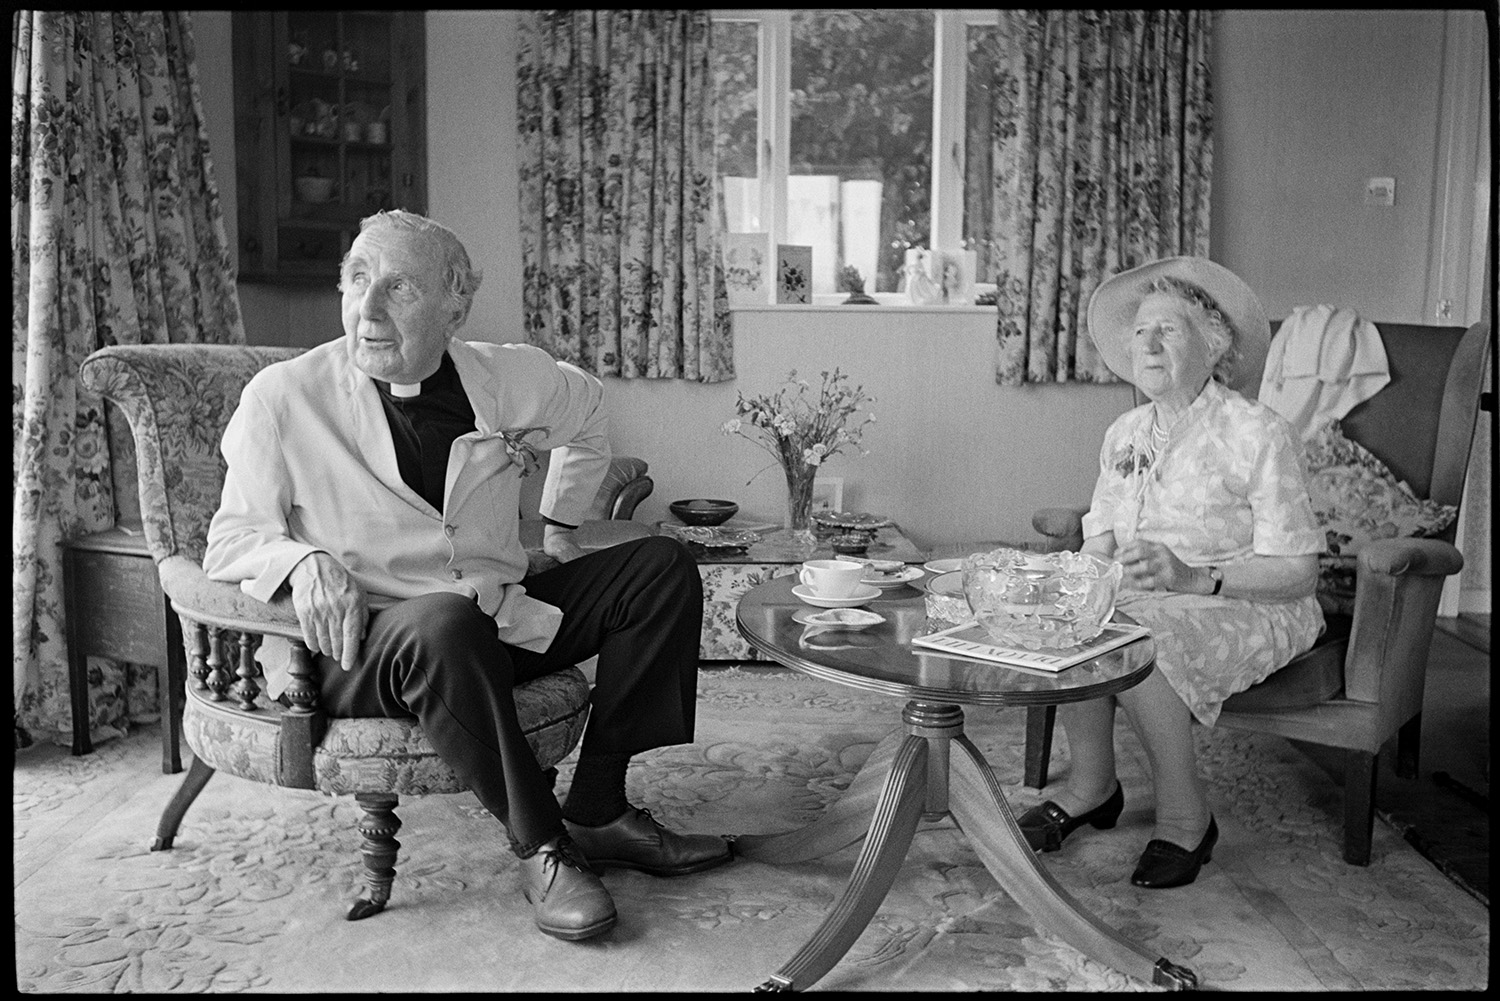 Church fete in garden, stalls, cakes, vicar making speech, thatched pavilion.
[The Reverend Richards of Chulmleigh and a woman having tea at the church fete, in a sitting room in a house at Cricket Close, Chulmleigh. There are two armchairs, a small round table, and floral curtains in the room.]